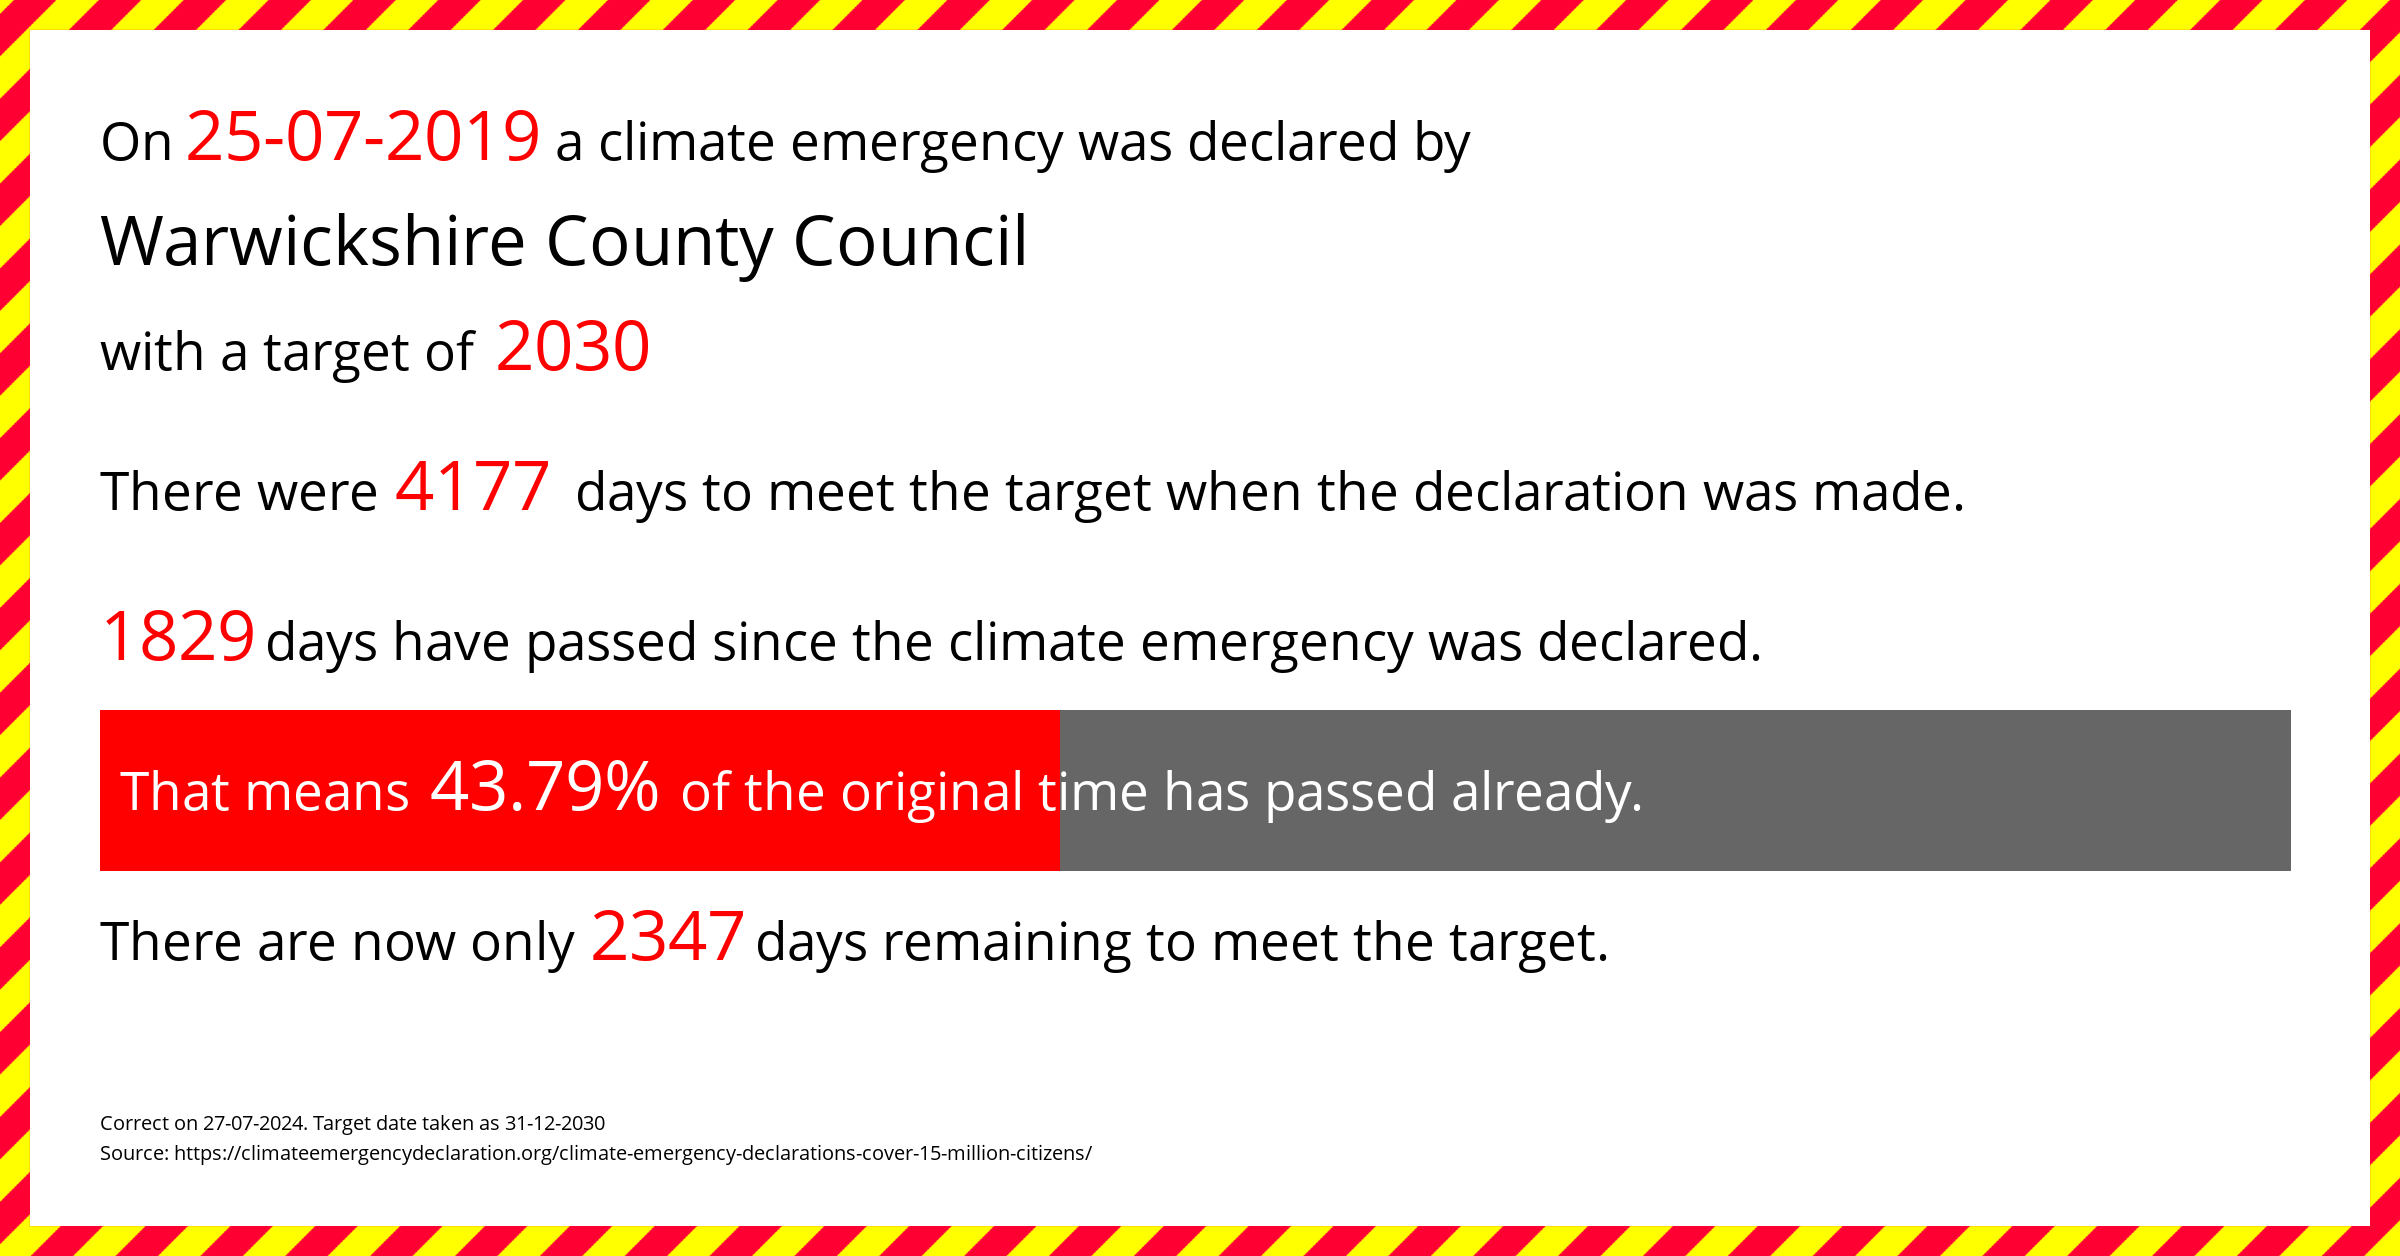 Warwickshire County Council declared a Climate emergency on Thursday 25th July 2019, with a target of 2030.